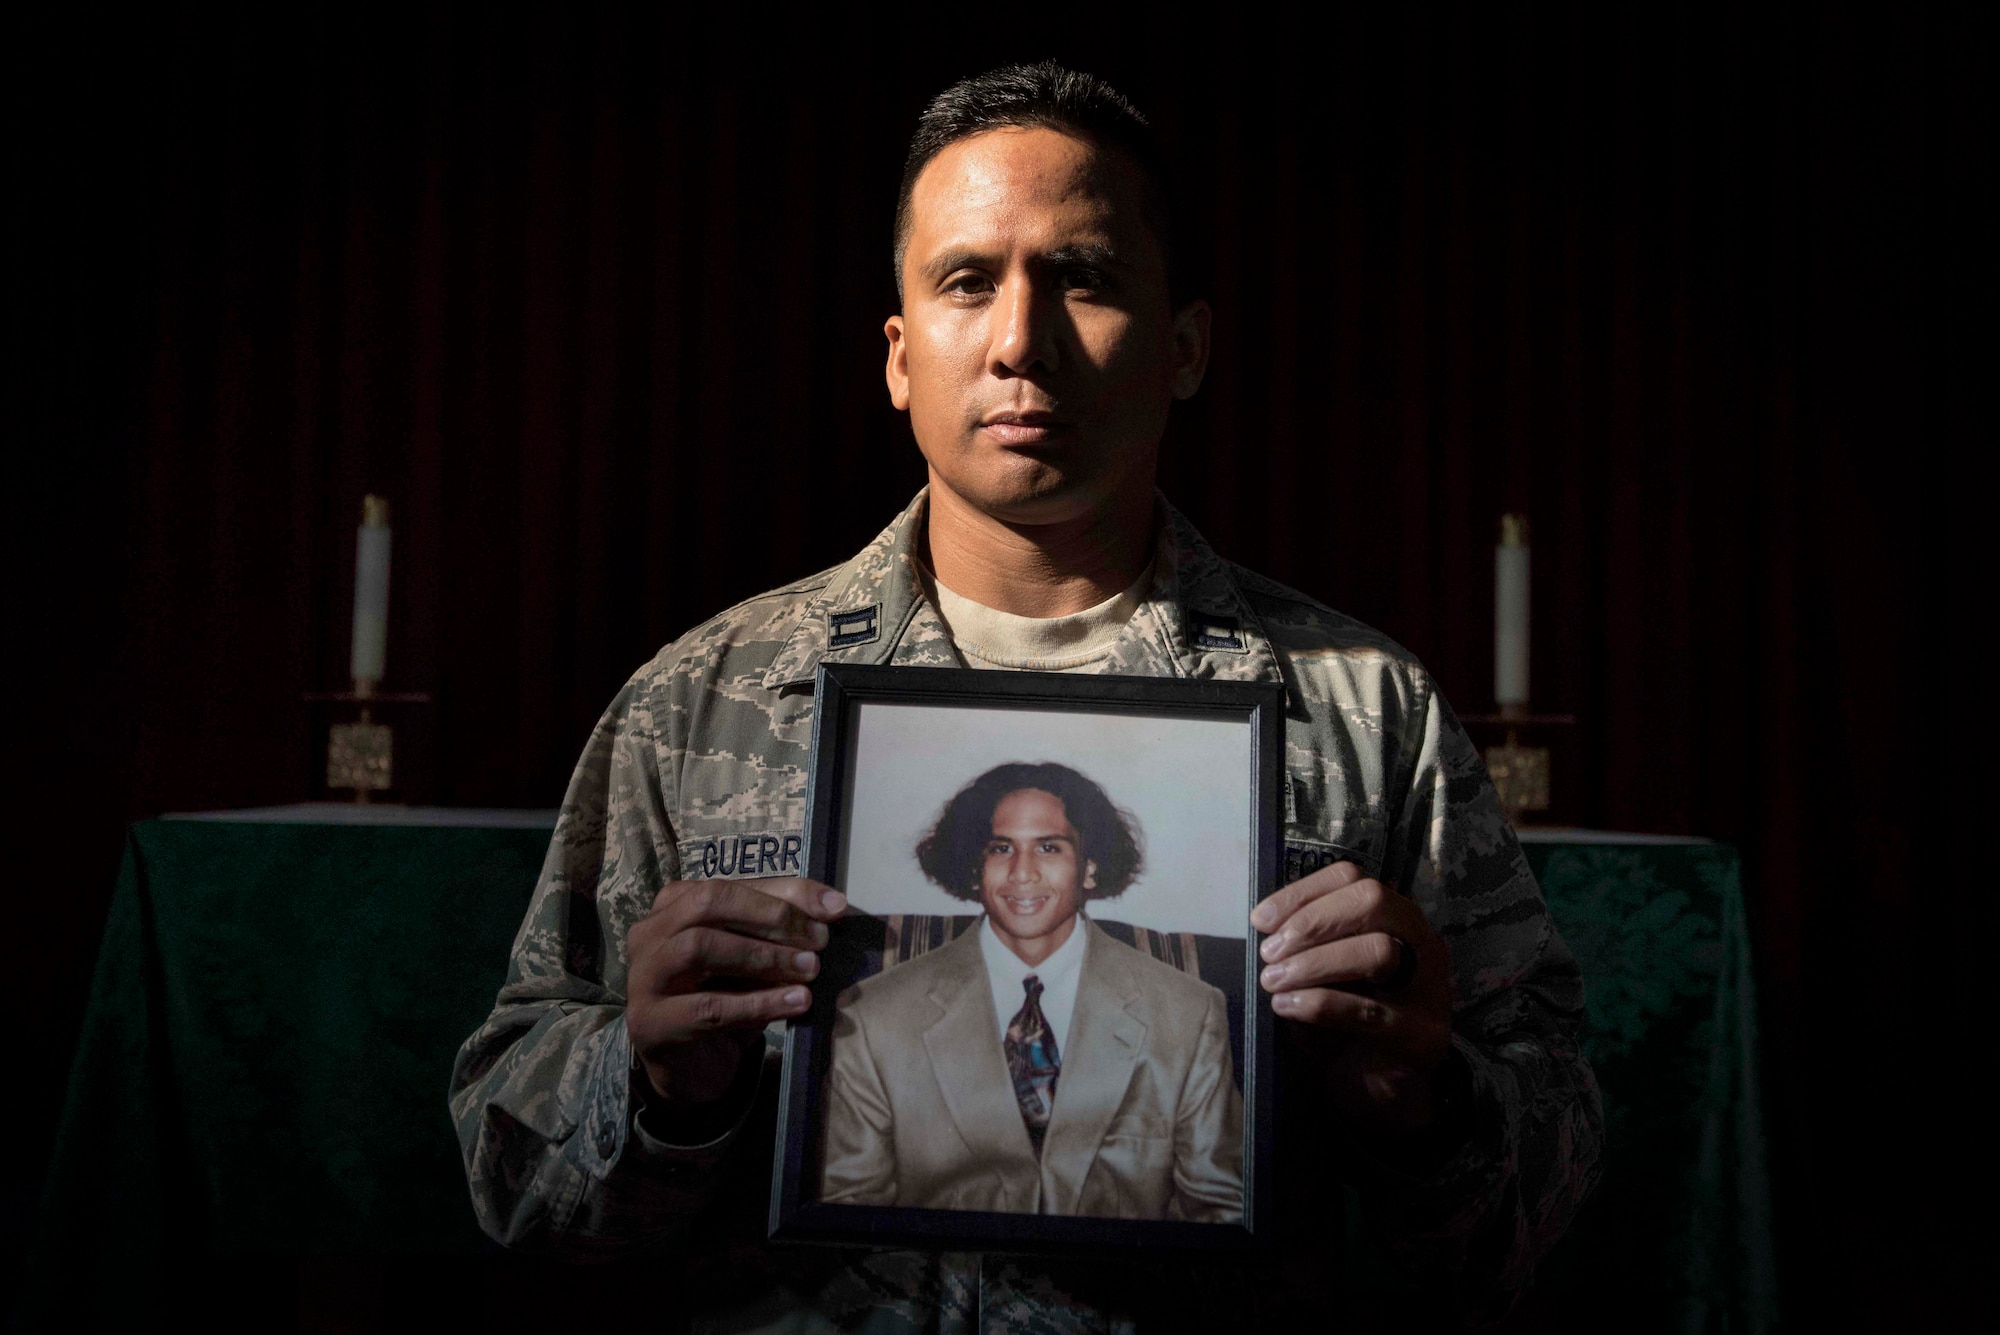 U.S. Air Force Capt. Genesis Guerrero, a 39th Air Base Wing chaplain, holds his high school portrait at Incirlik Air Base, Turkey, Oct. 2, 2019. When he was 17 years old, Guerrero used the picture to successfully dissuade his father from committing suicide. (U.S. Air Force photo by Staff. Sgt. Joshua Magbanua)